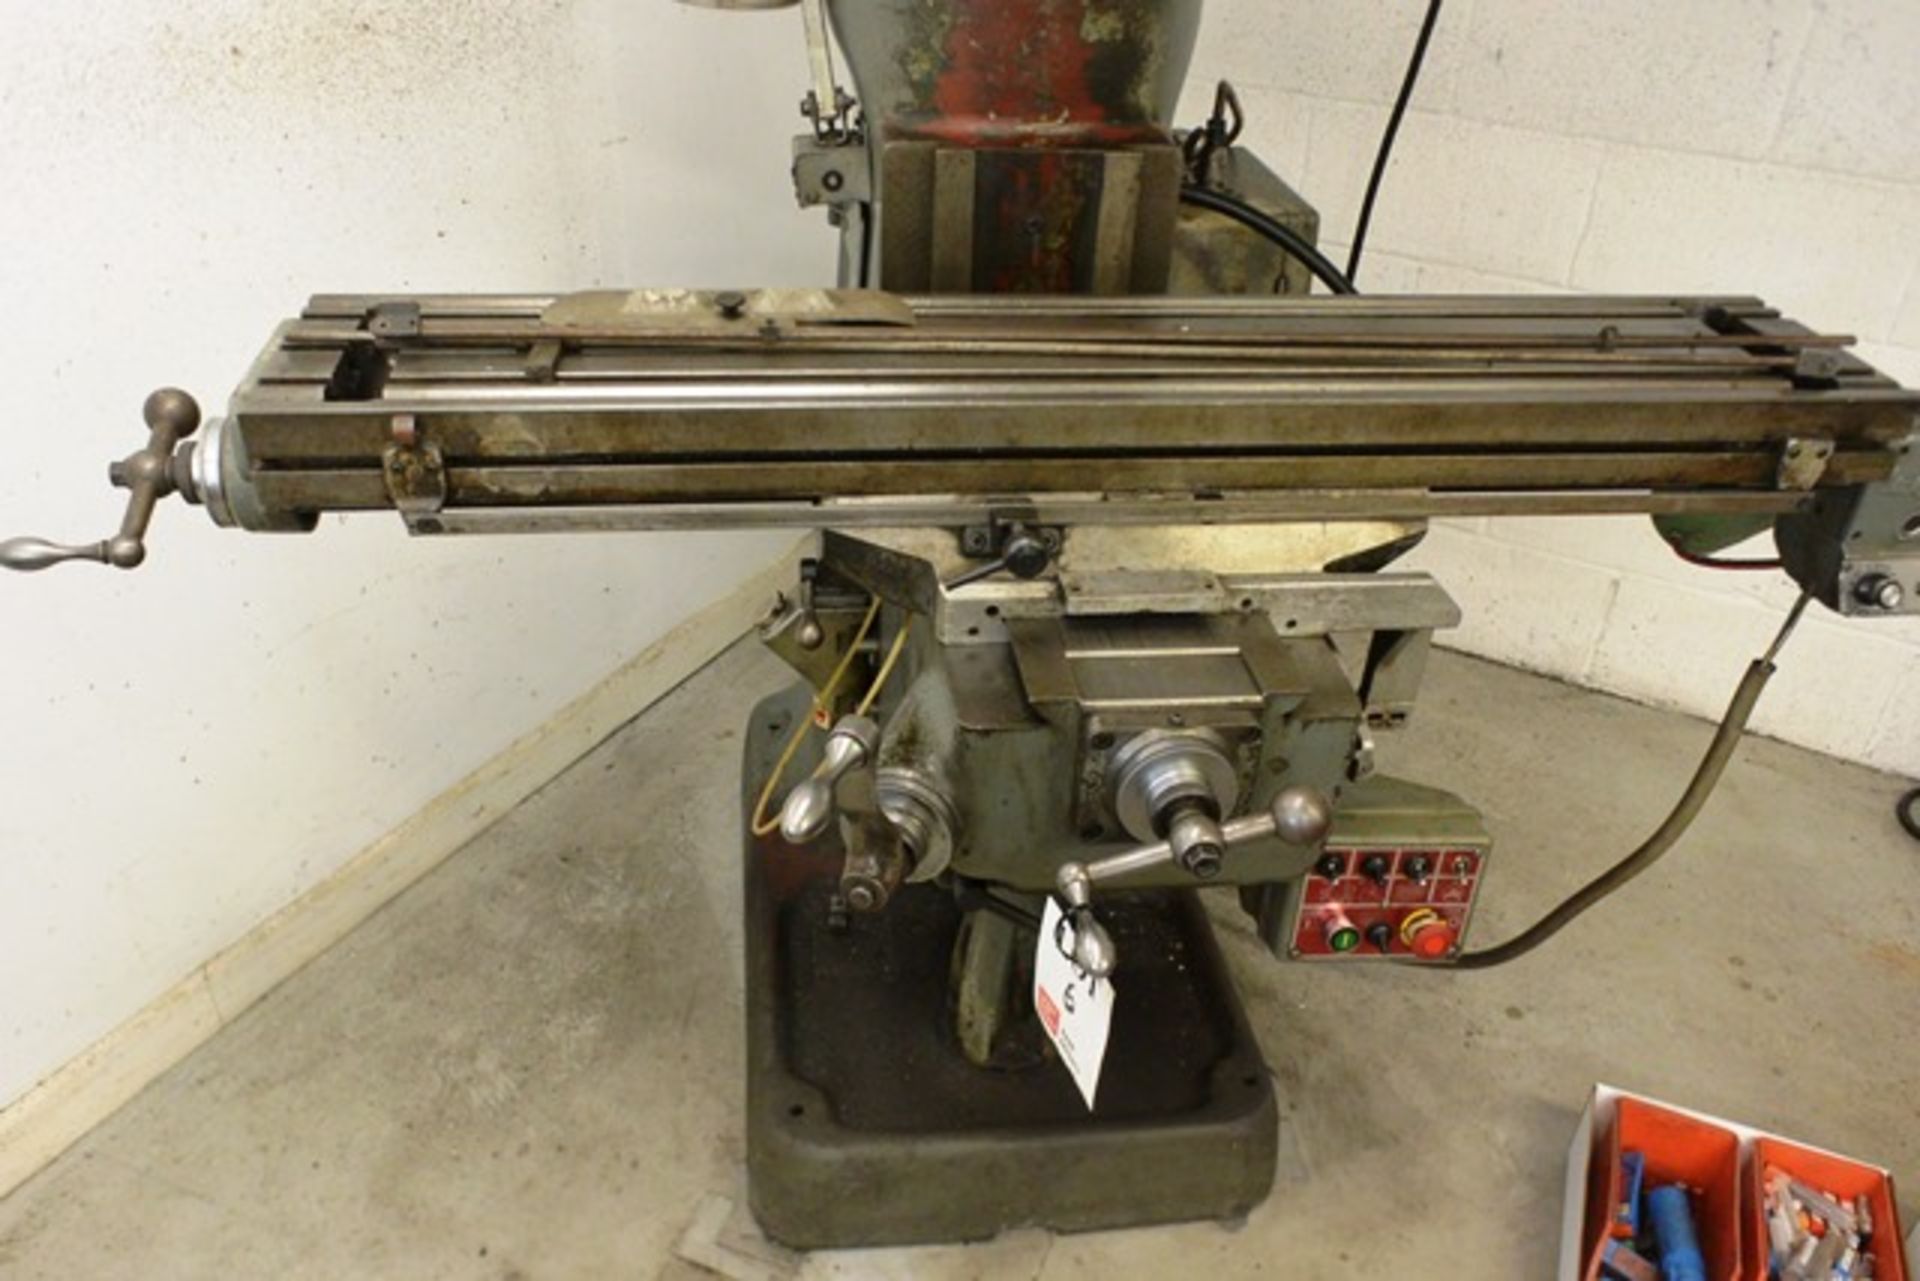 Bridgeport turret mill, serial no. JB 21676 table size 9 x 48" spindle speed: 67 - 4600 rpm (3 phase - Image 4 of 6